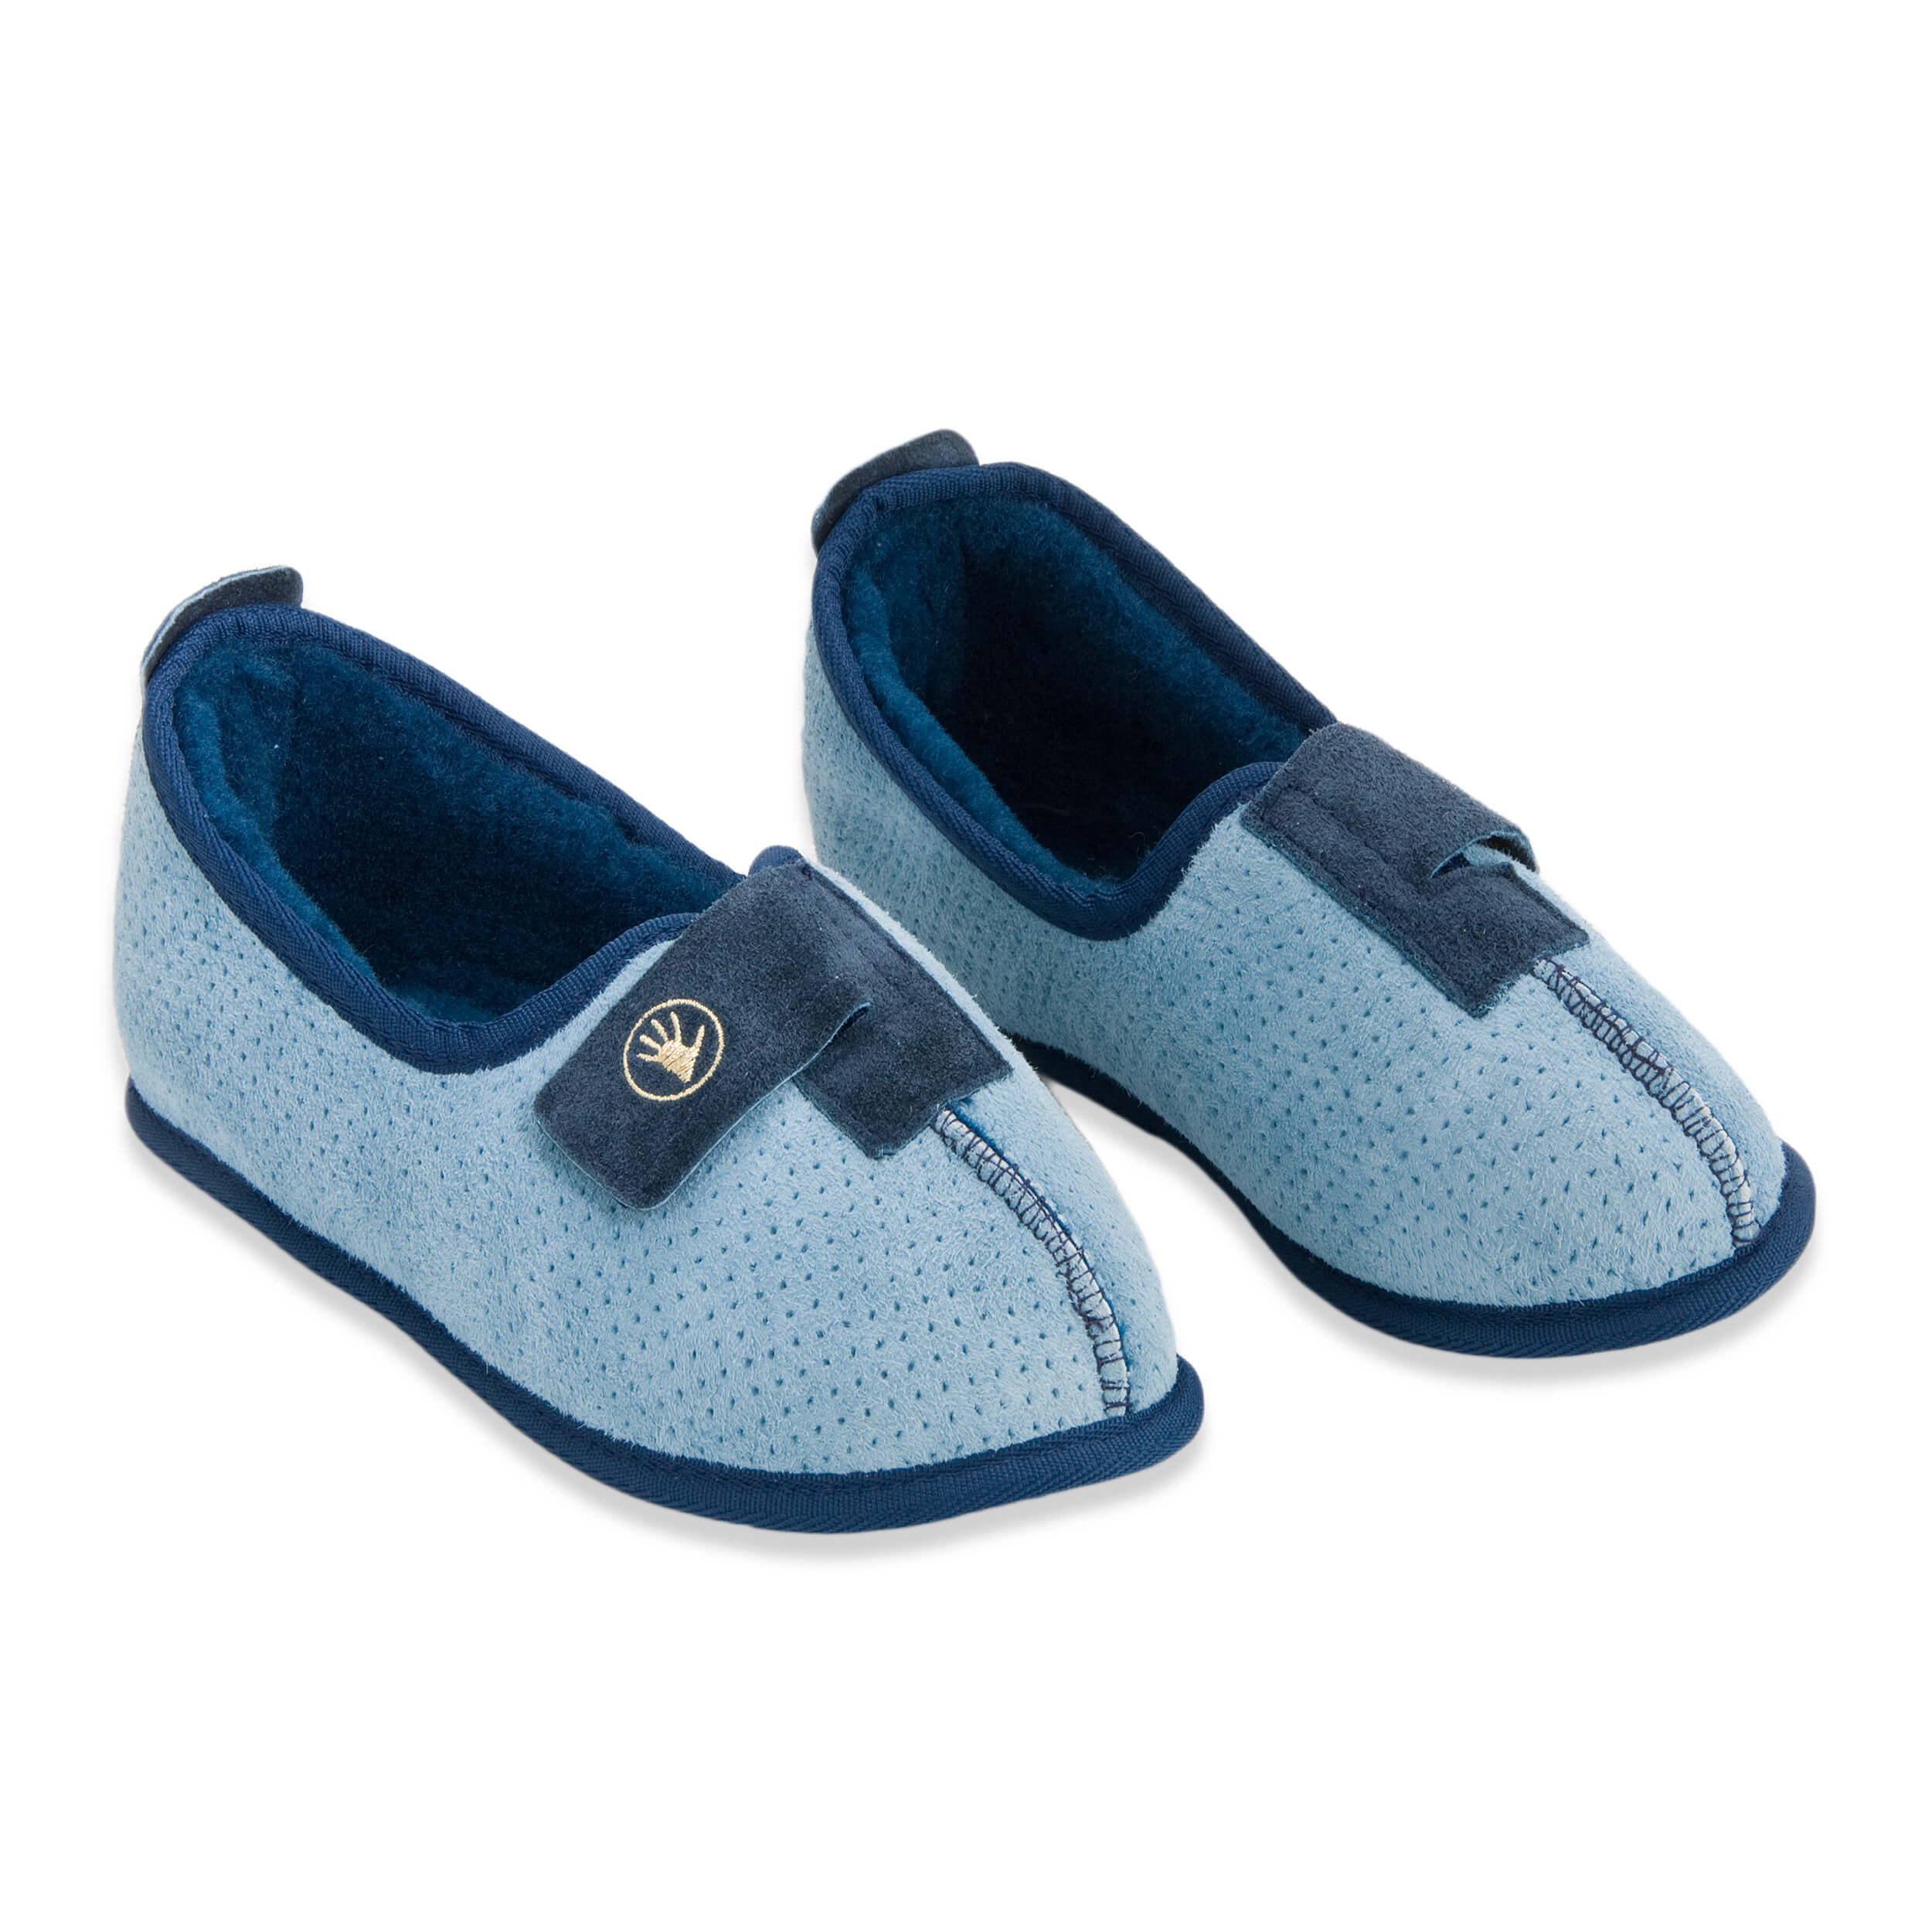 Shear Comfort Sovereign Snug Slippers - Mobility Aids & More